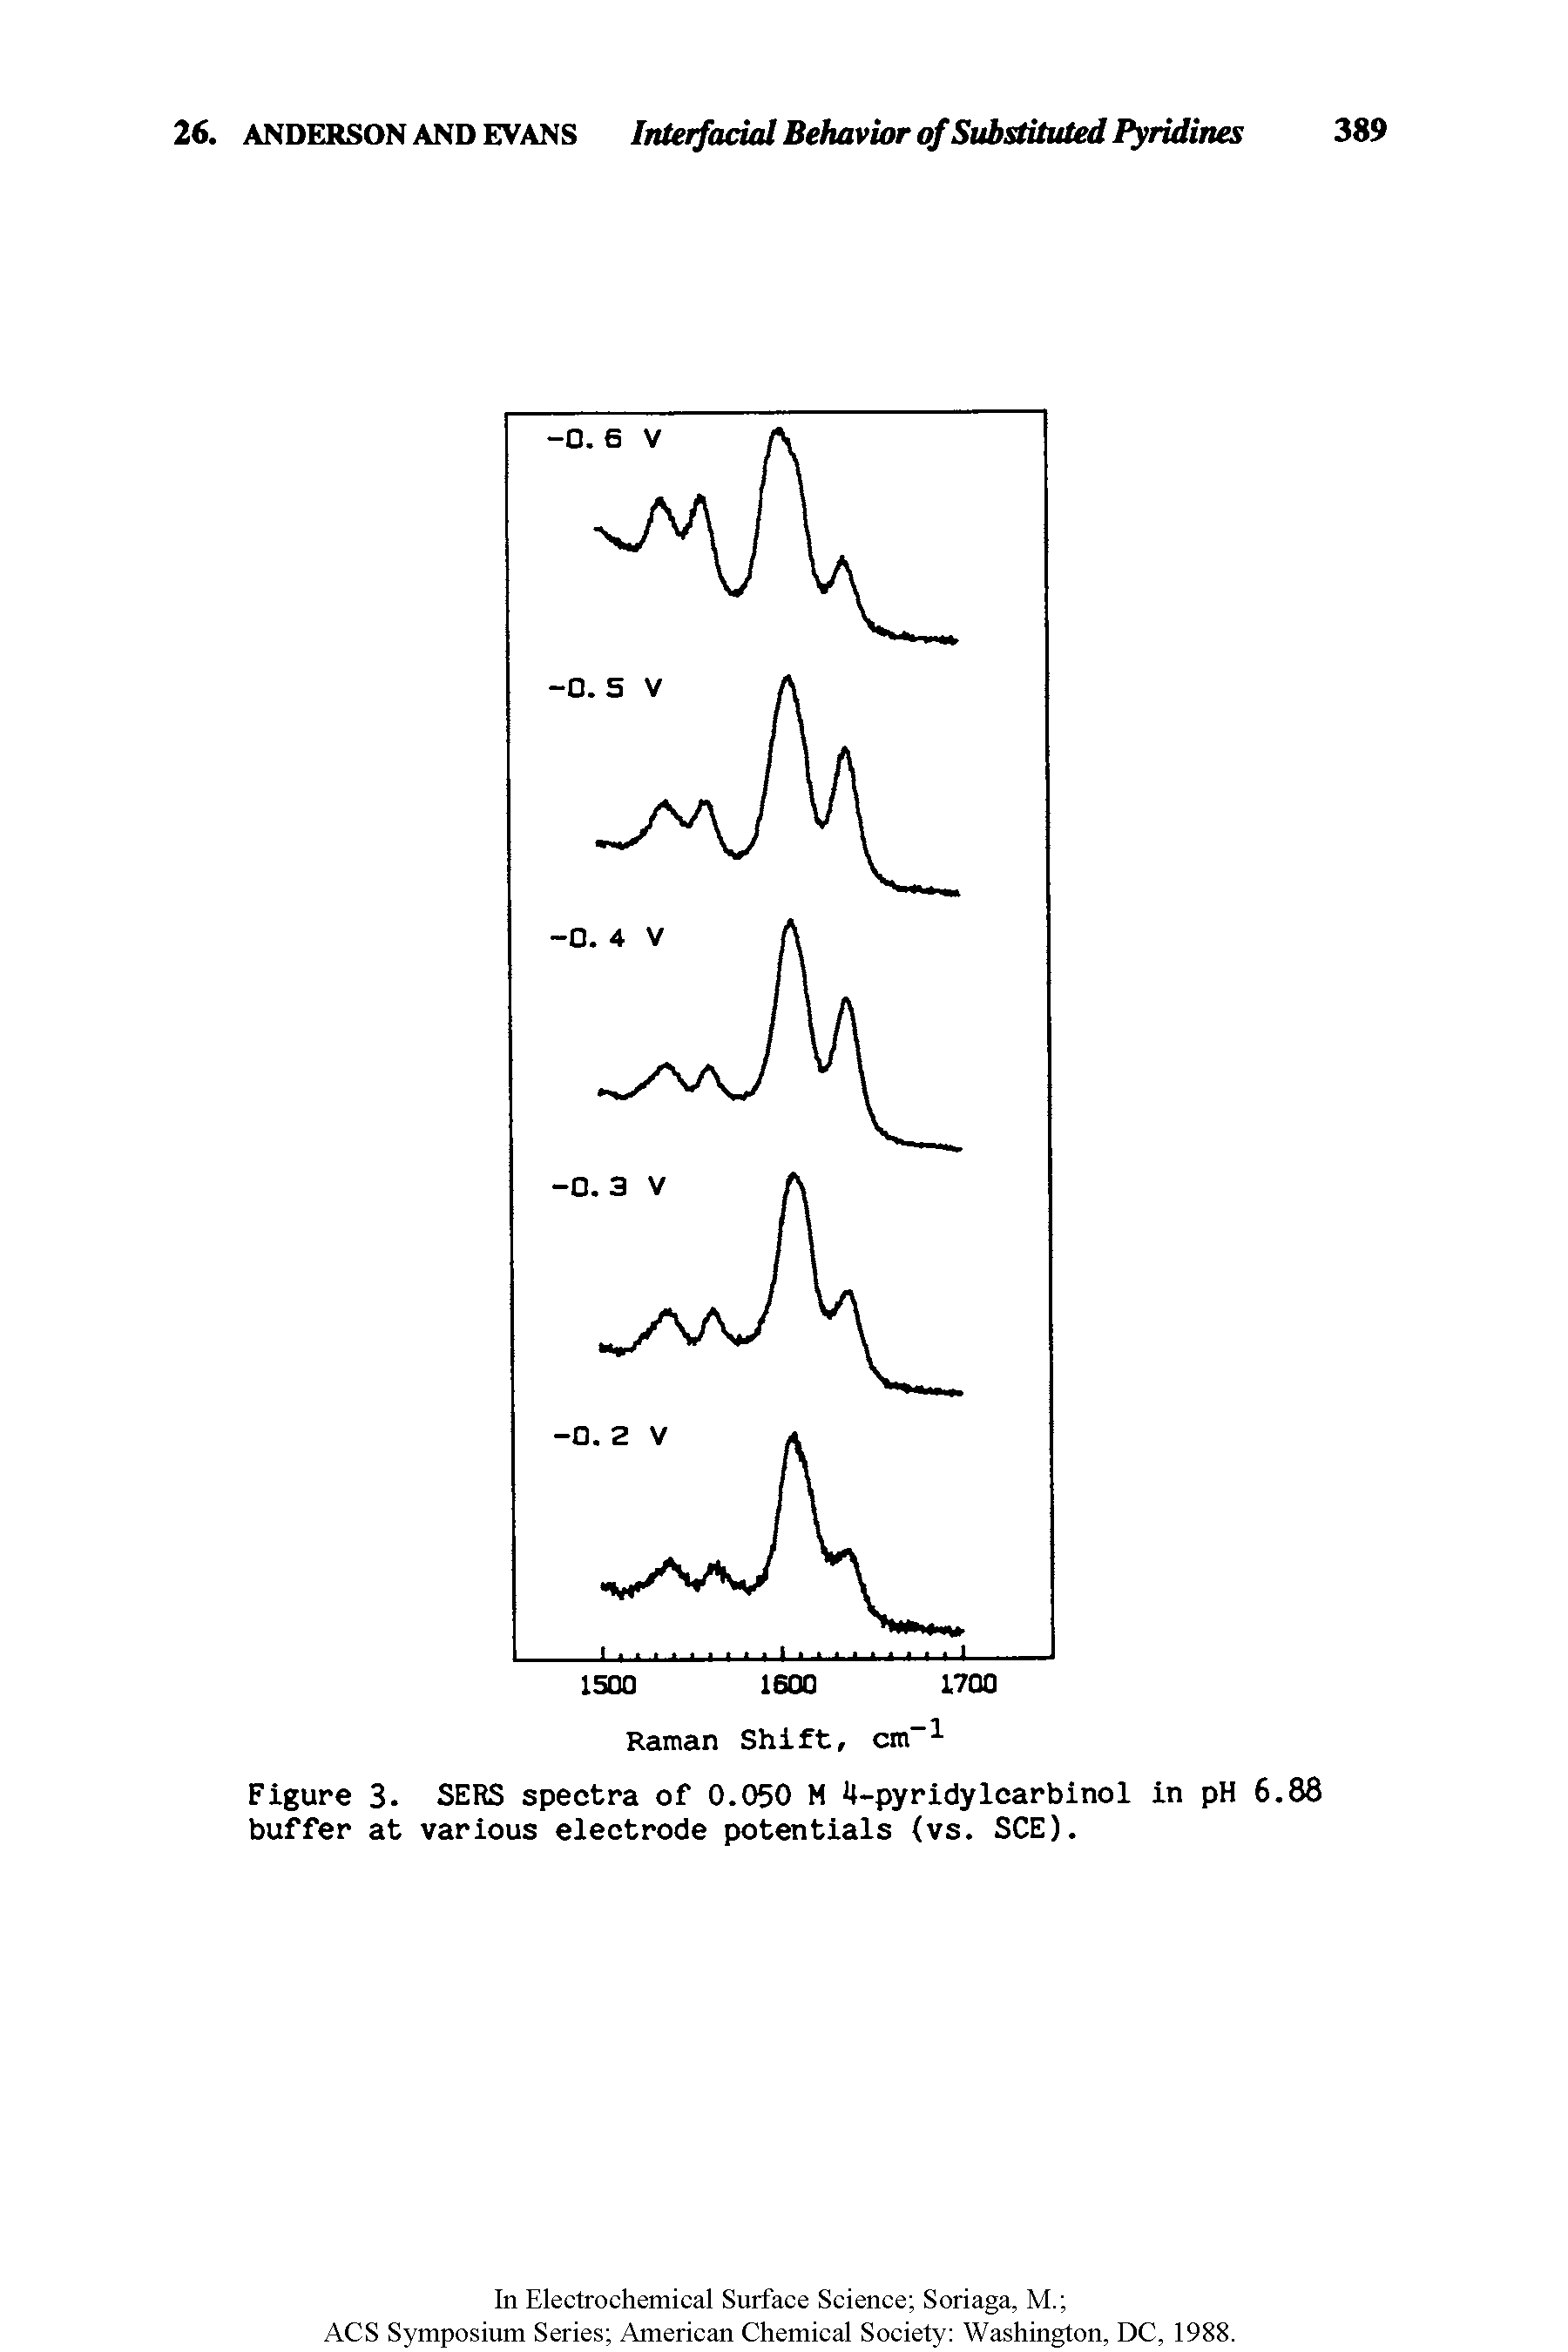 Figure 3. SERS spectra of 0.050 M 4-pyridylcarbinol in pH 6.88 buffer at various electrode potentials (vs. SCE).